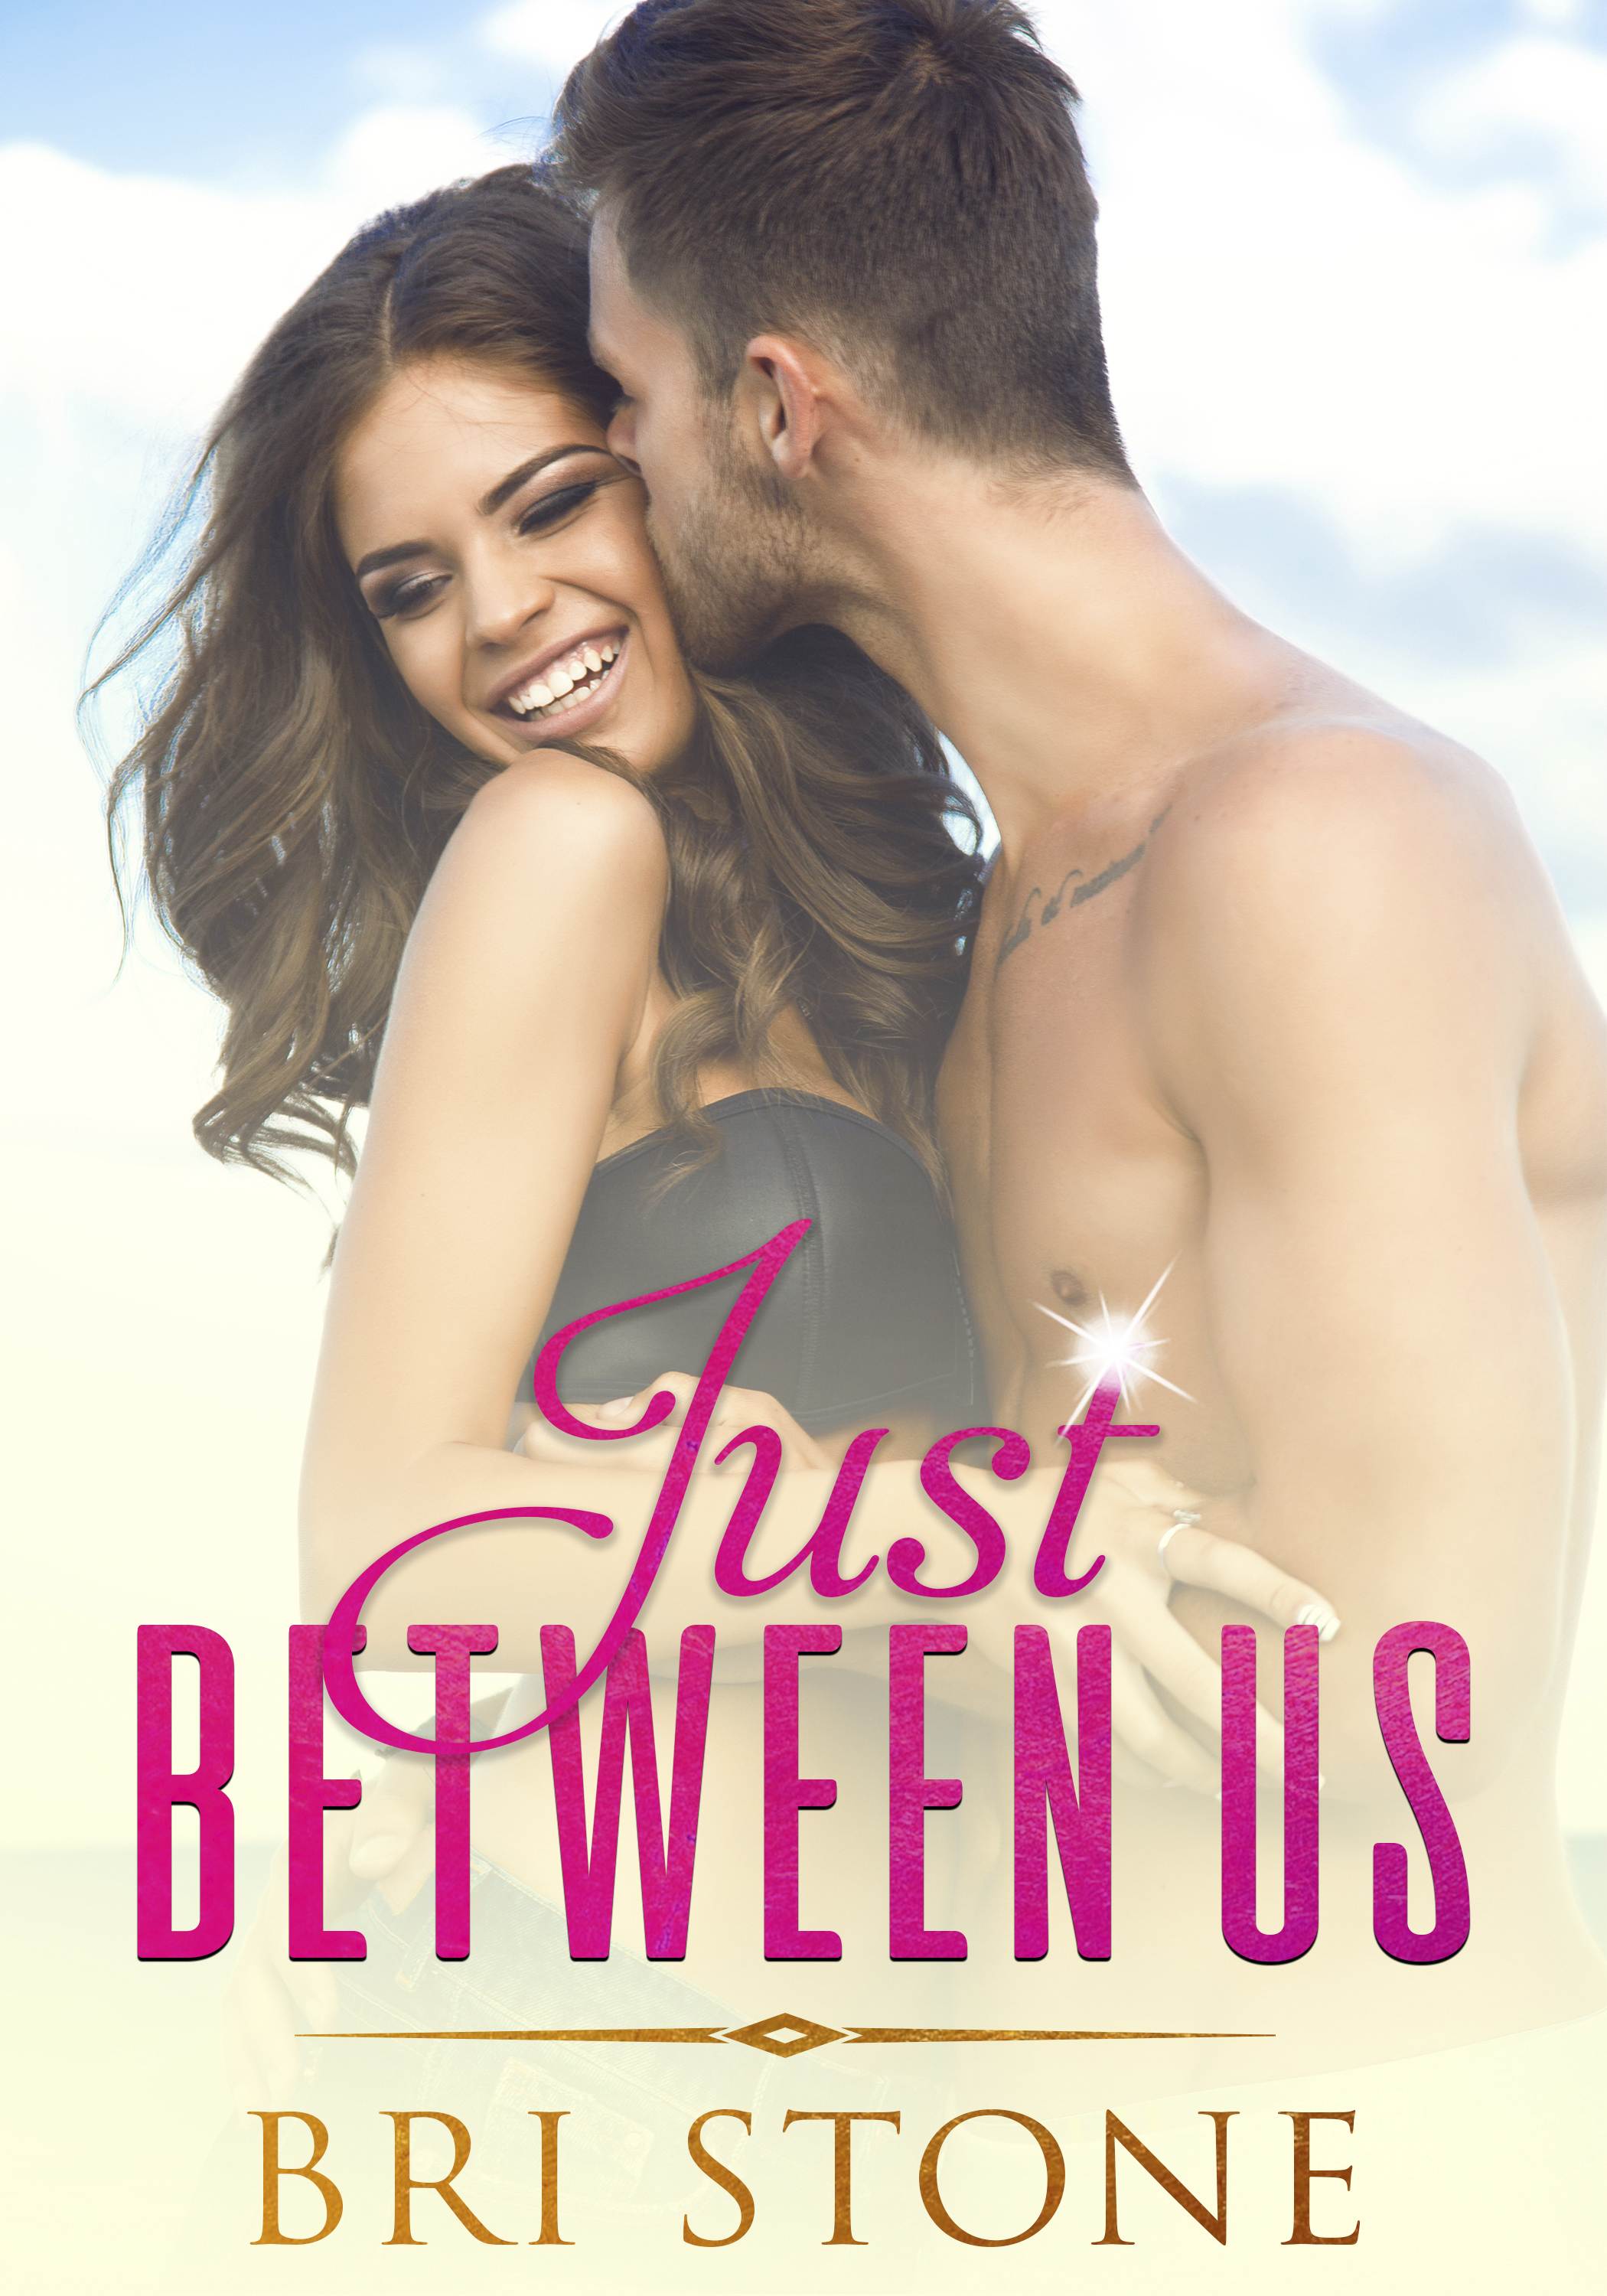 FREE: Just Between Us: A Friends to Lovers Romance by Bri Stone